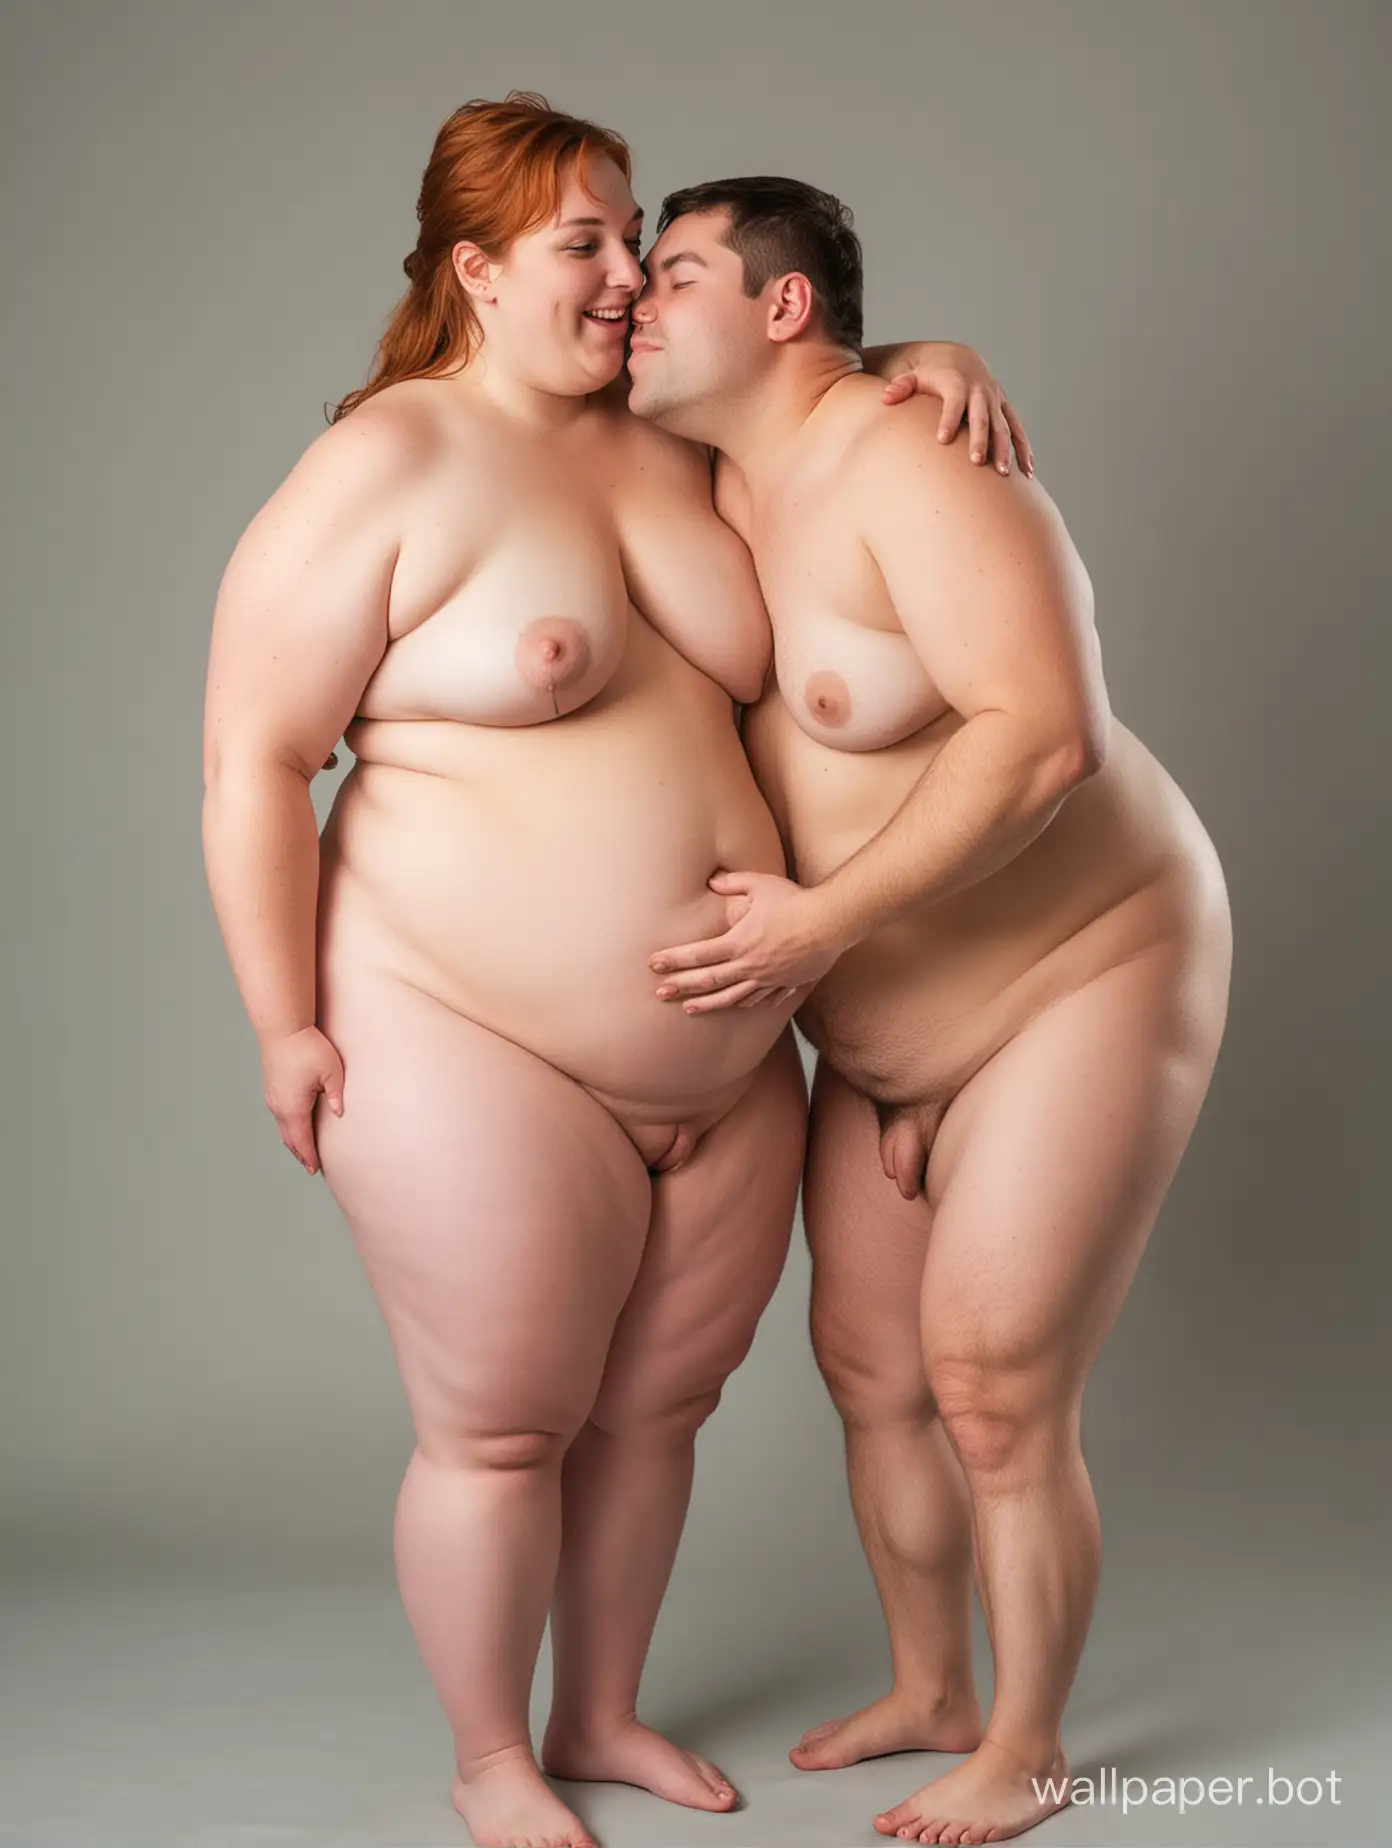 Affectionate-Embrace-Curvy-Woman-and-Nude-Man